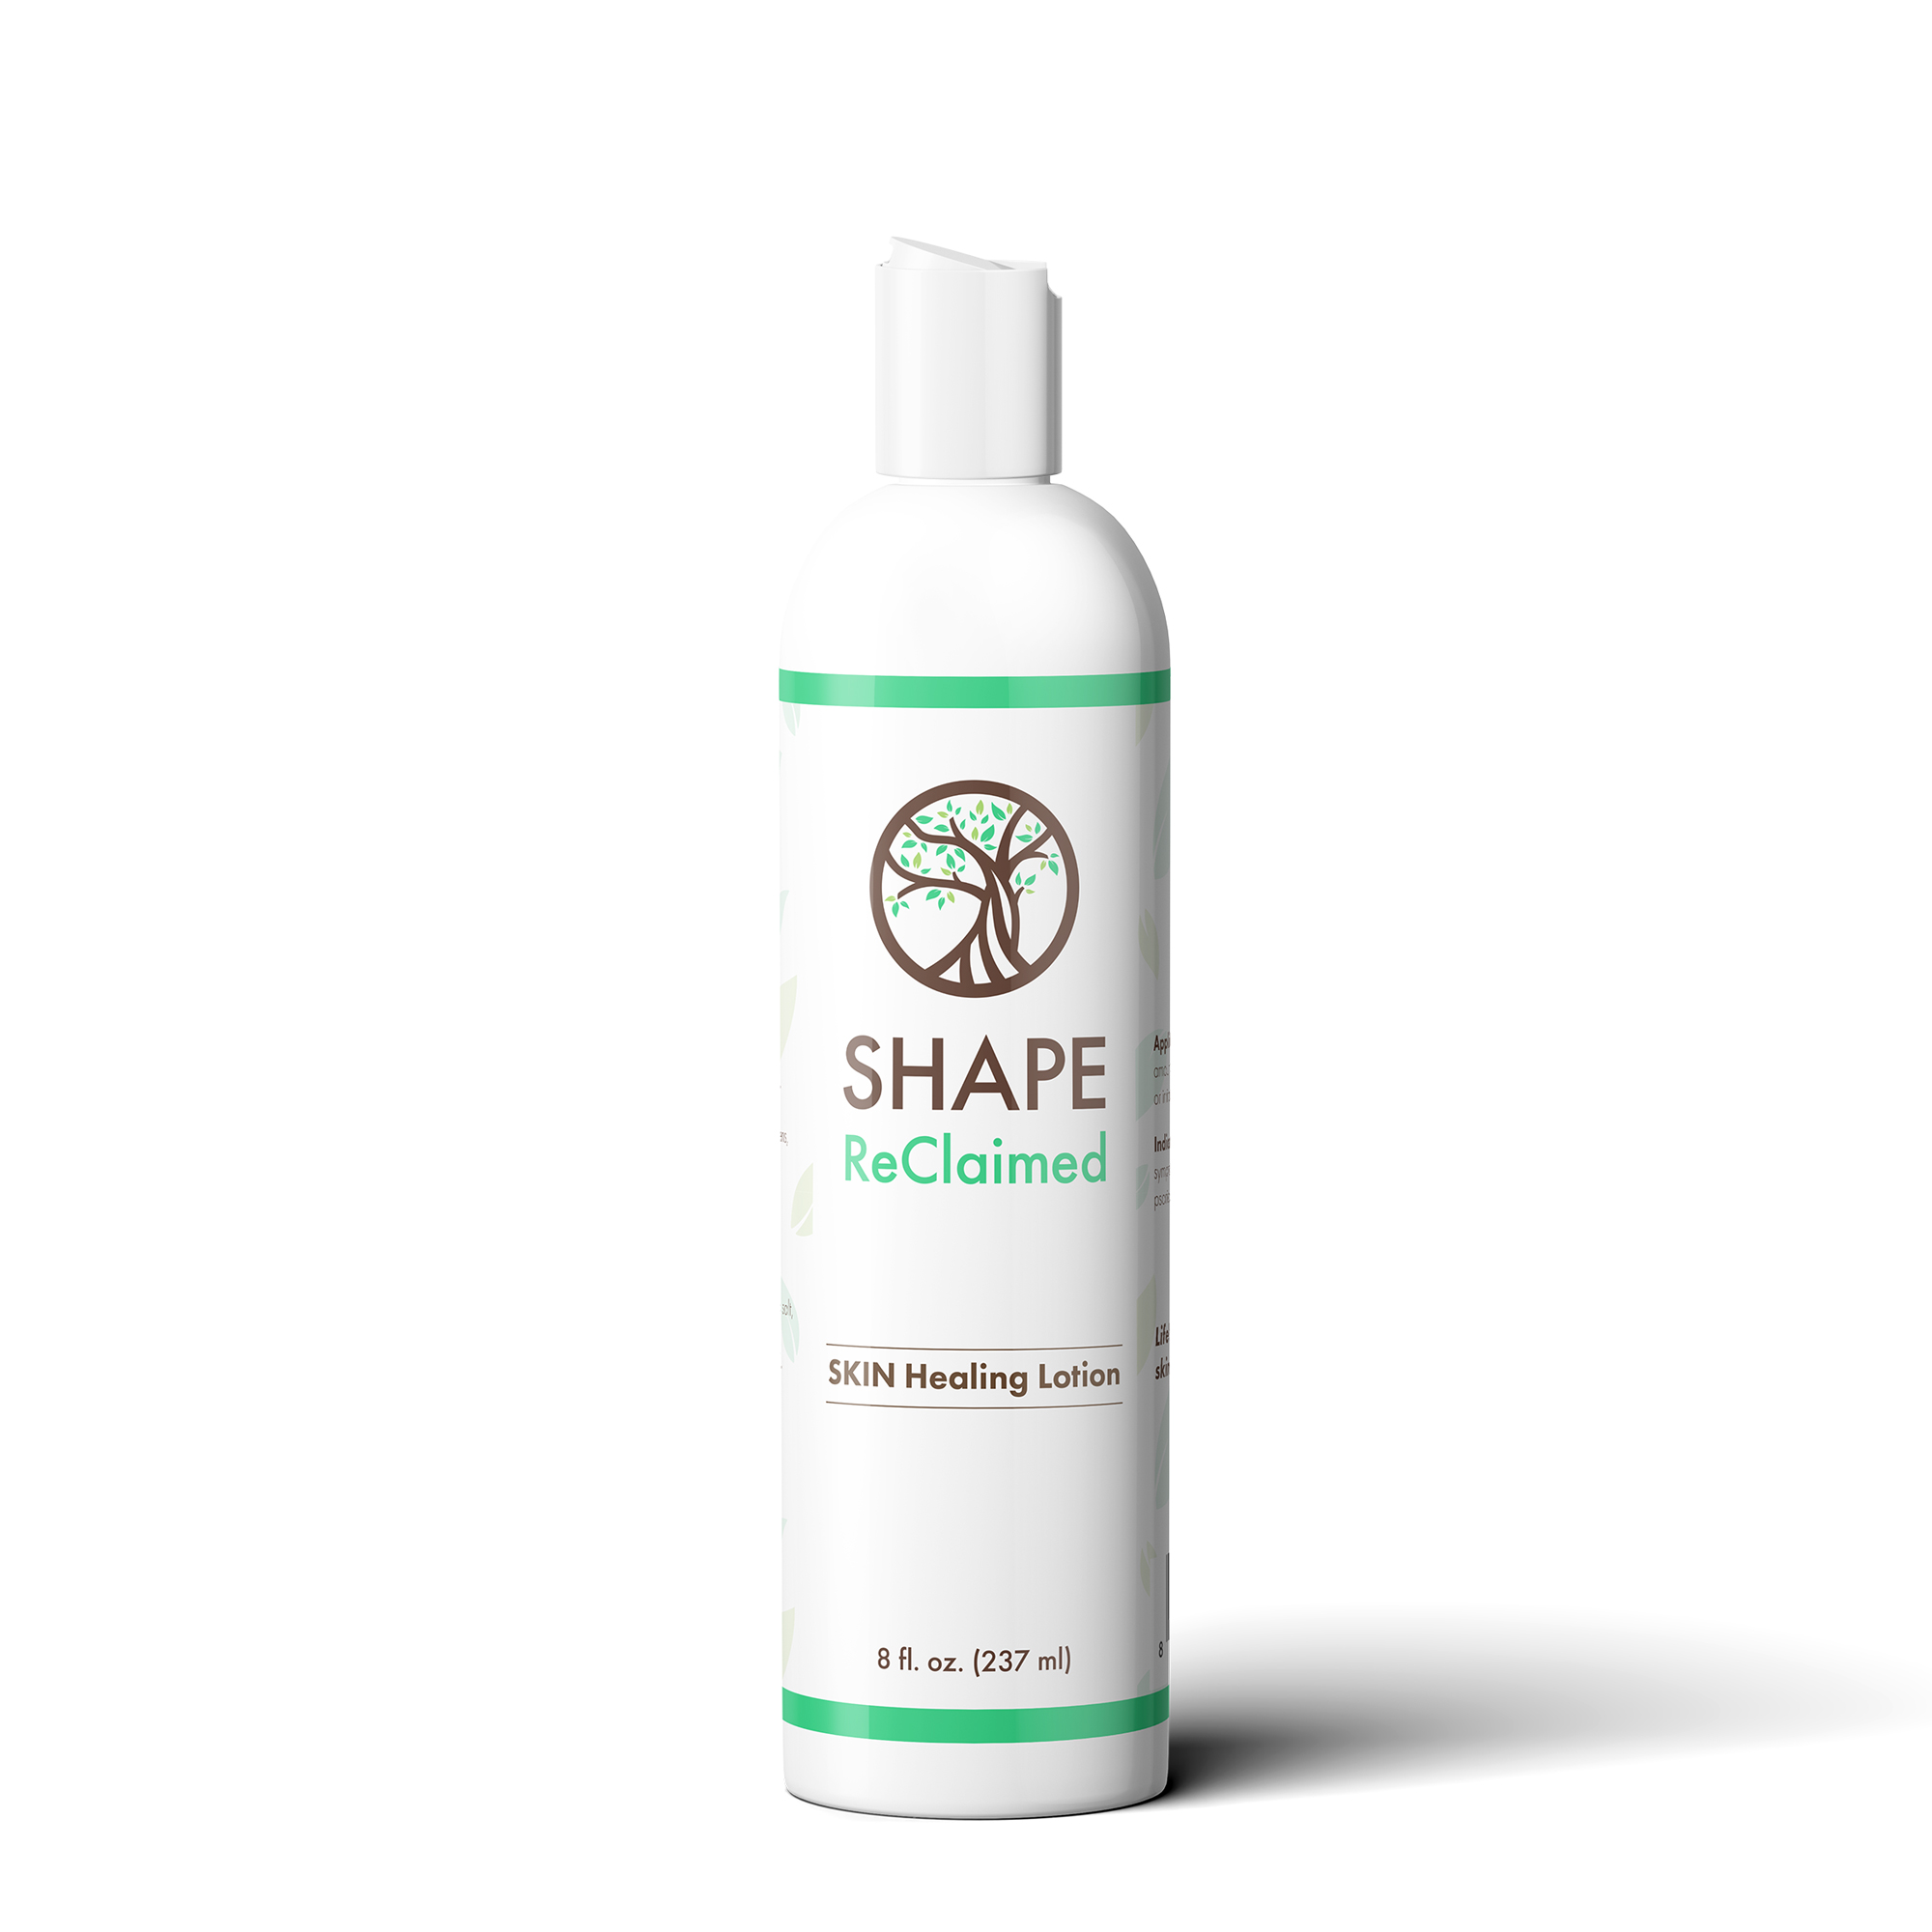 SKIN Healing Lotion is excellent for dry, cracked, scaly and itchy skin.